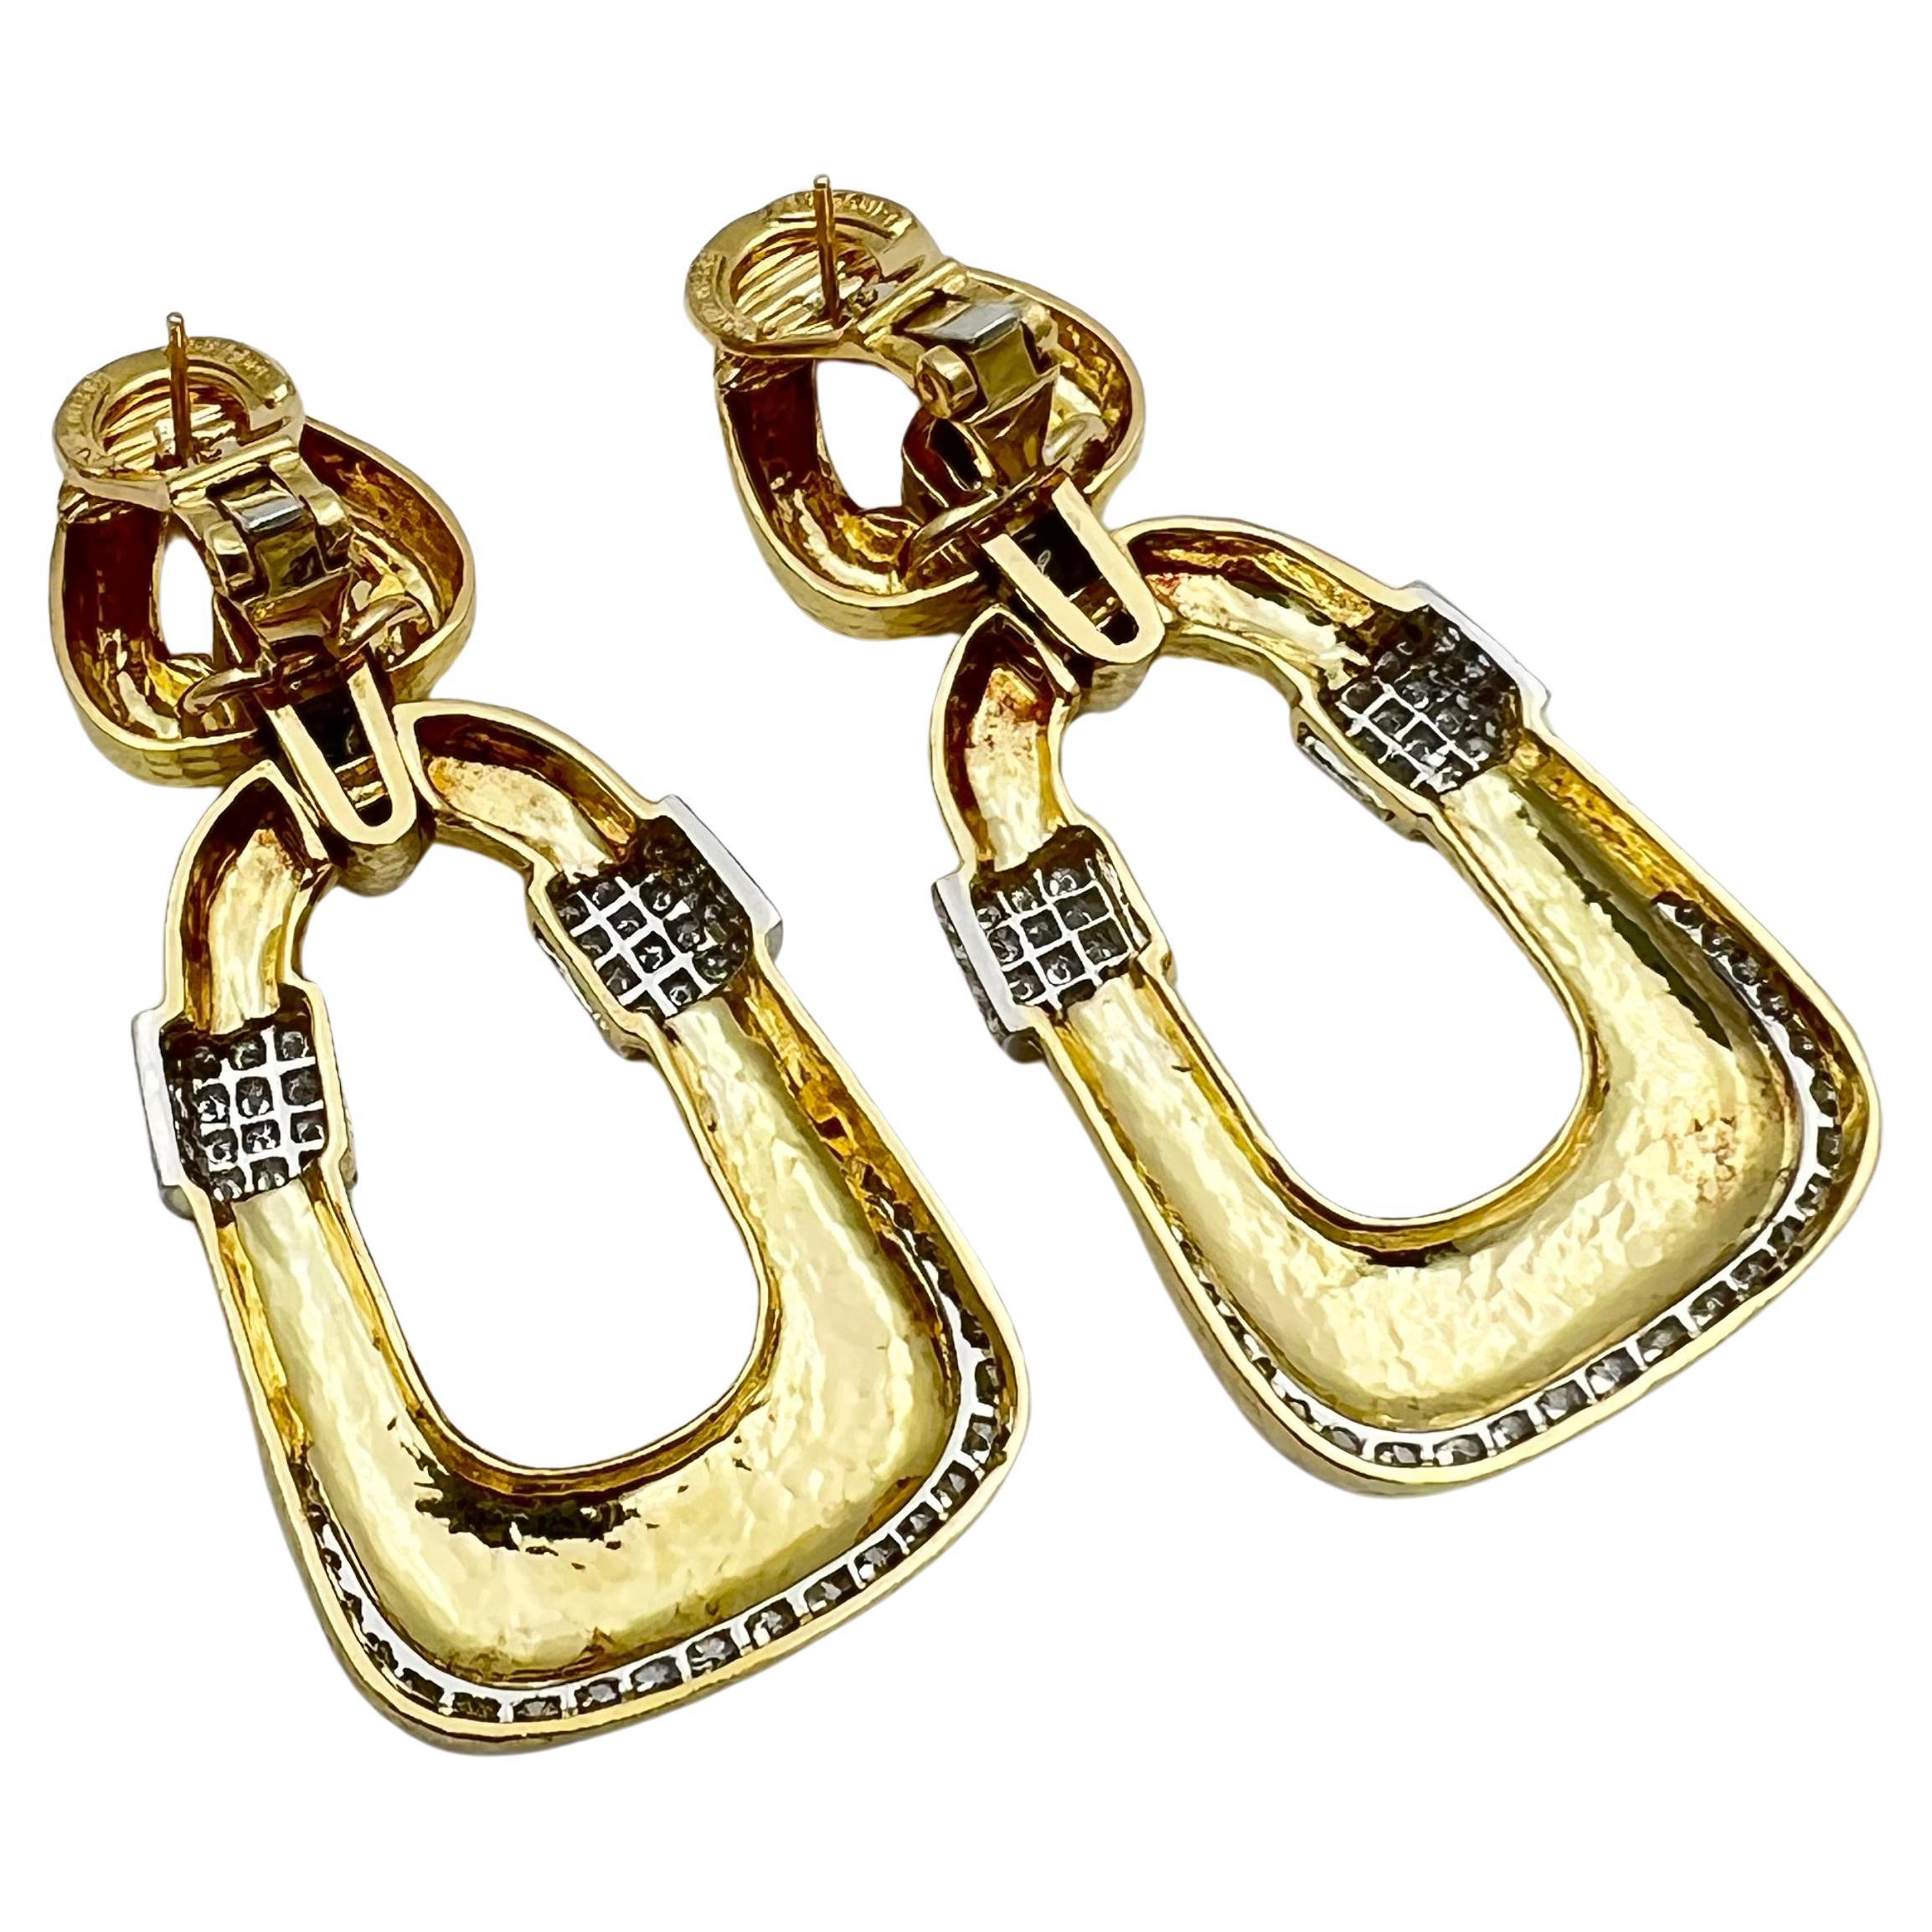 Stylish door knocker earrings by David Webb in 18 karat yellow gold, platinum and diamonds.  Hammered polished finish on open-work triangular design tops with tapered rectangular drop bottoms.  Joined by platinum diamond pave' links with platinum